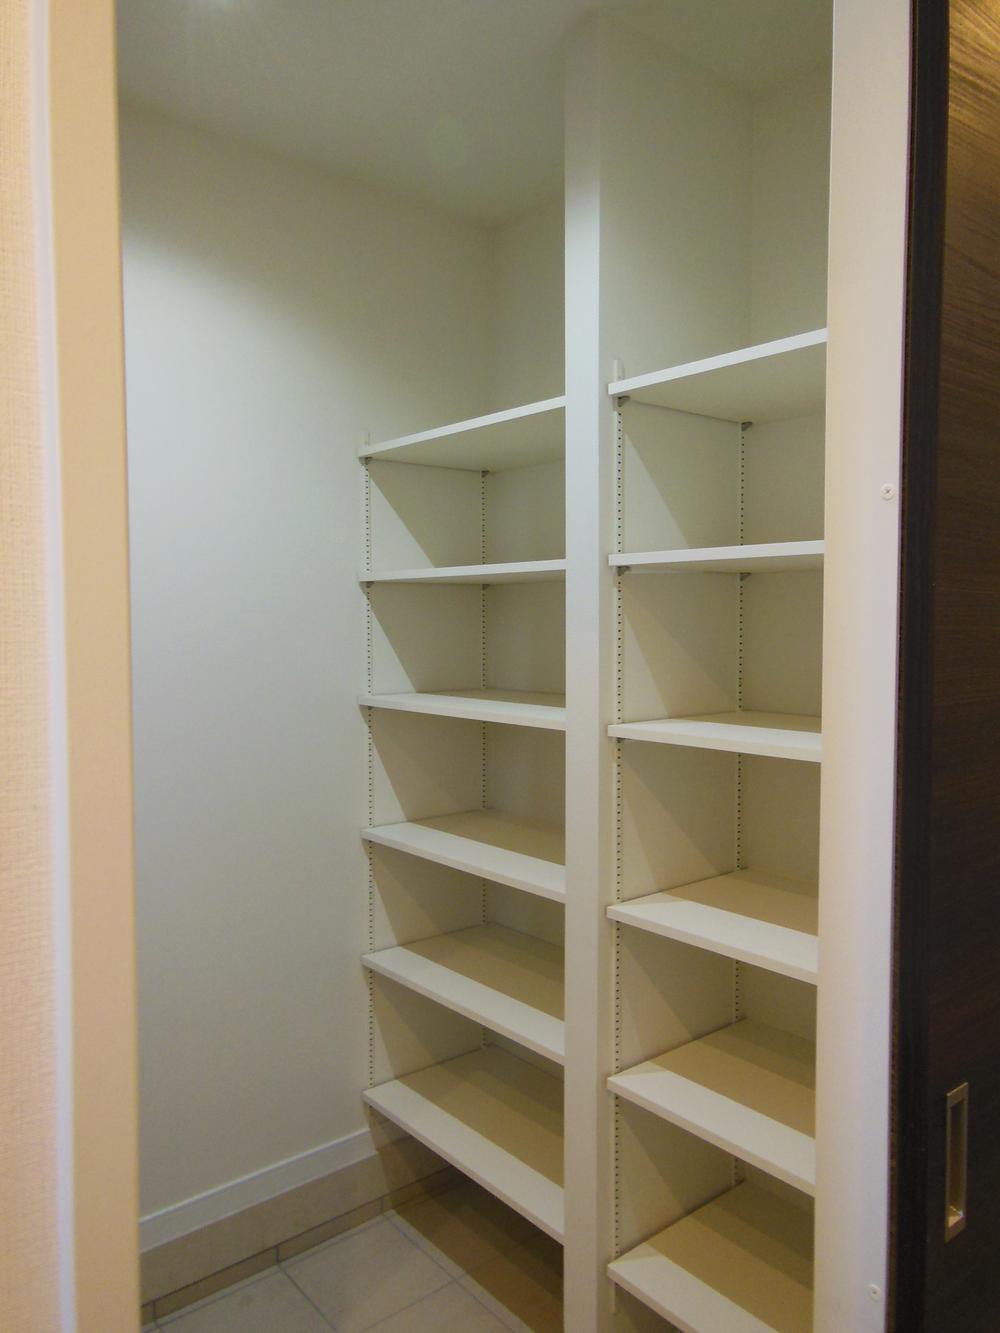 Other introspection. Large storage capacity attractive shoes closet